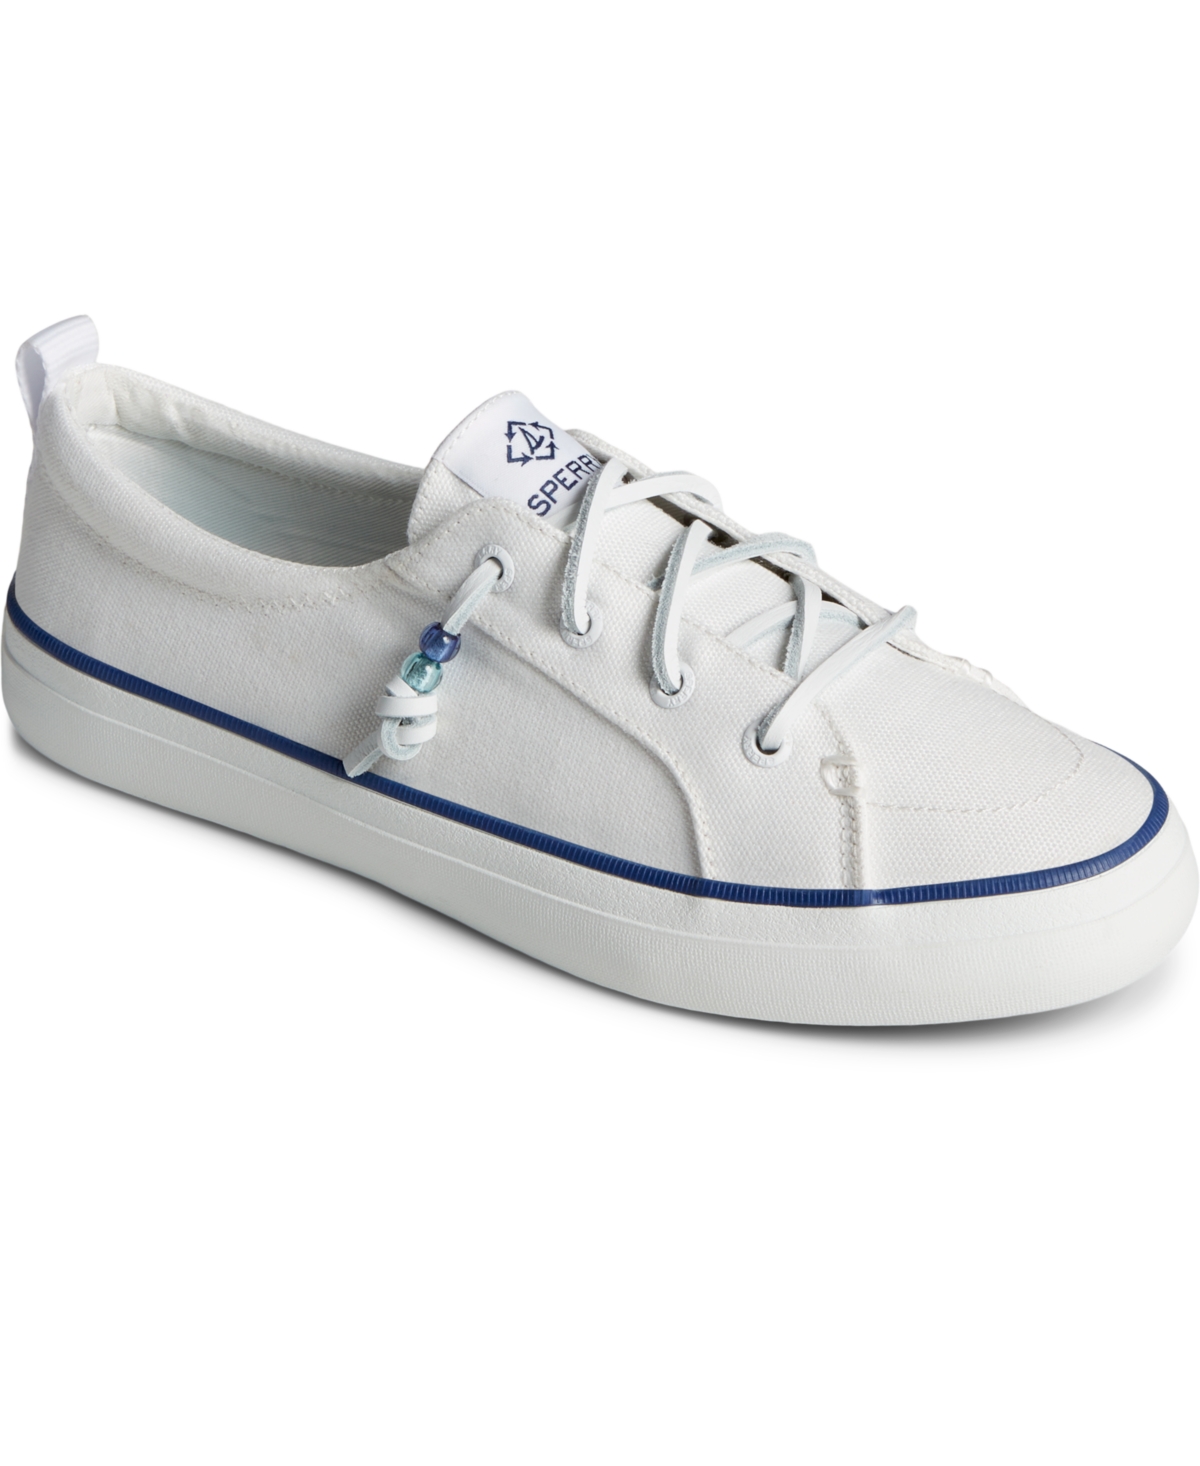 SPERRY WOMEN'S CREST VIBE TEXTILE SNEAKERS